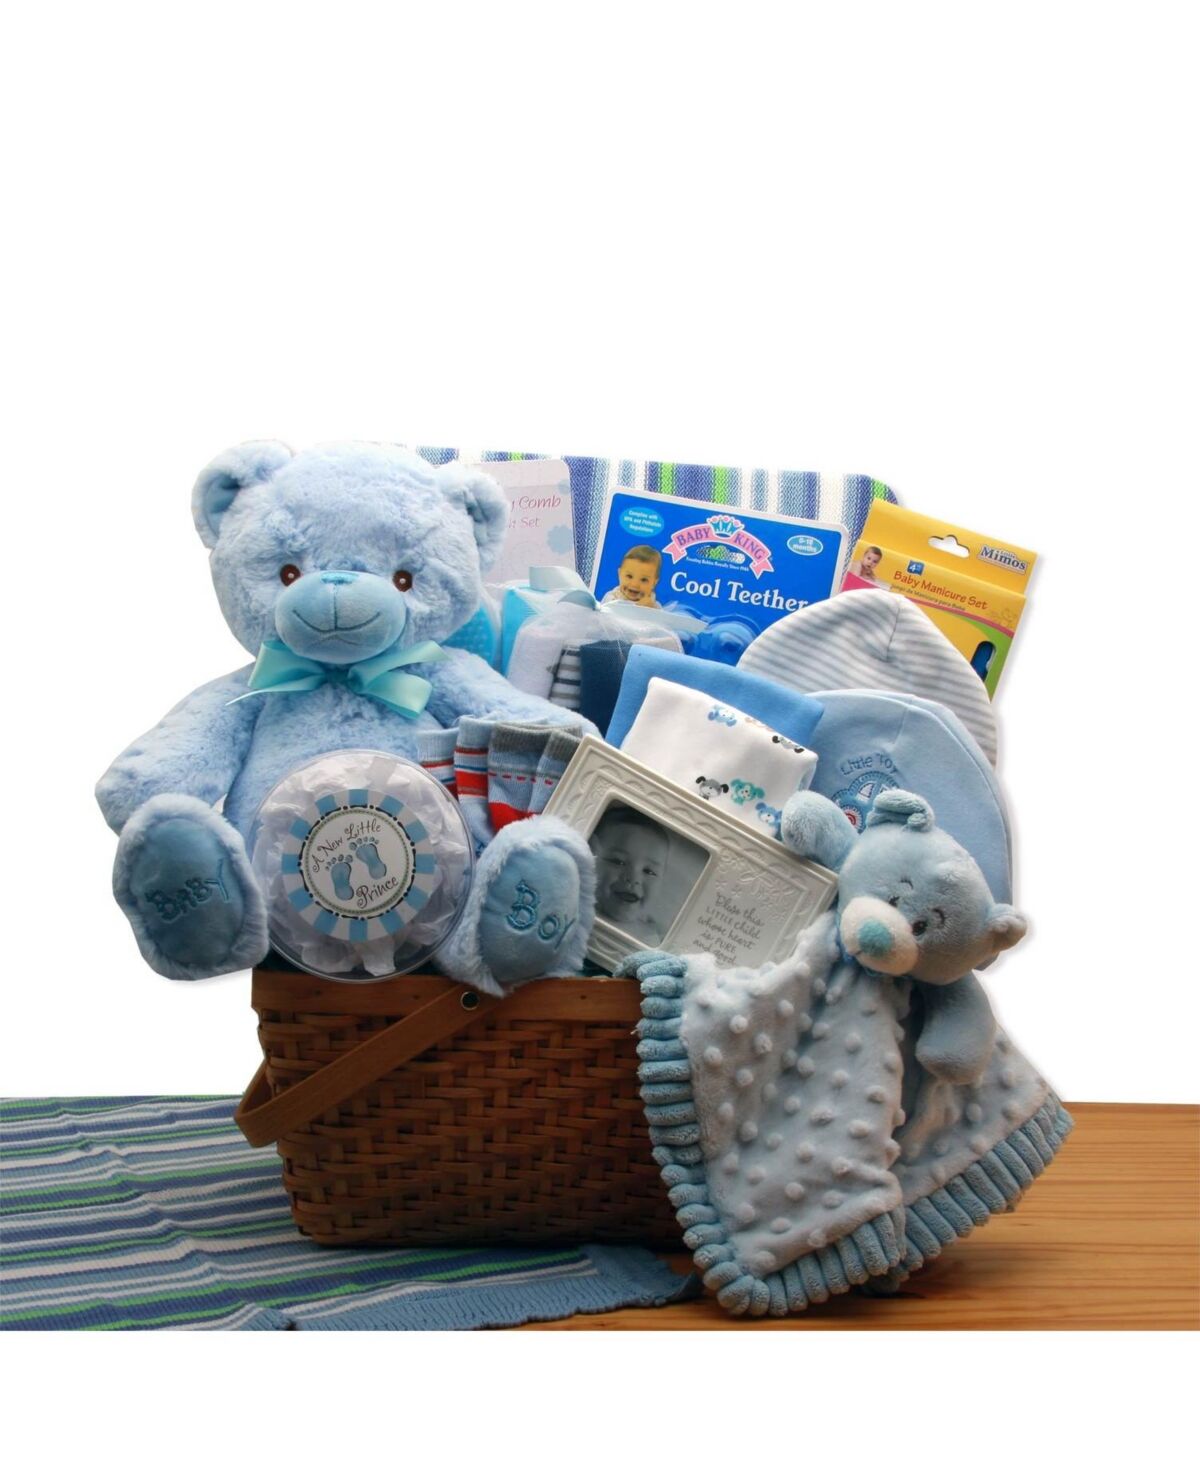 Gbds My First Teddy Bear New Baby Gift Basket - Blue - baby bath set - baby boy gift basket - 1 Basket